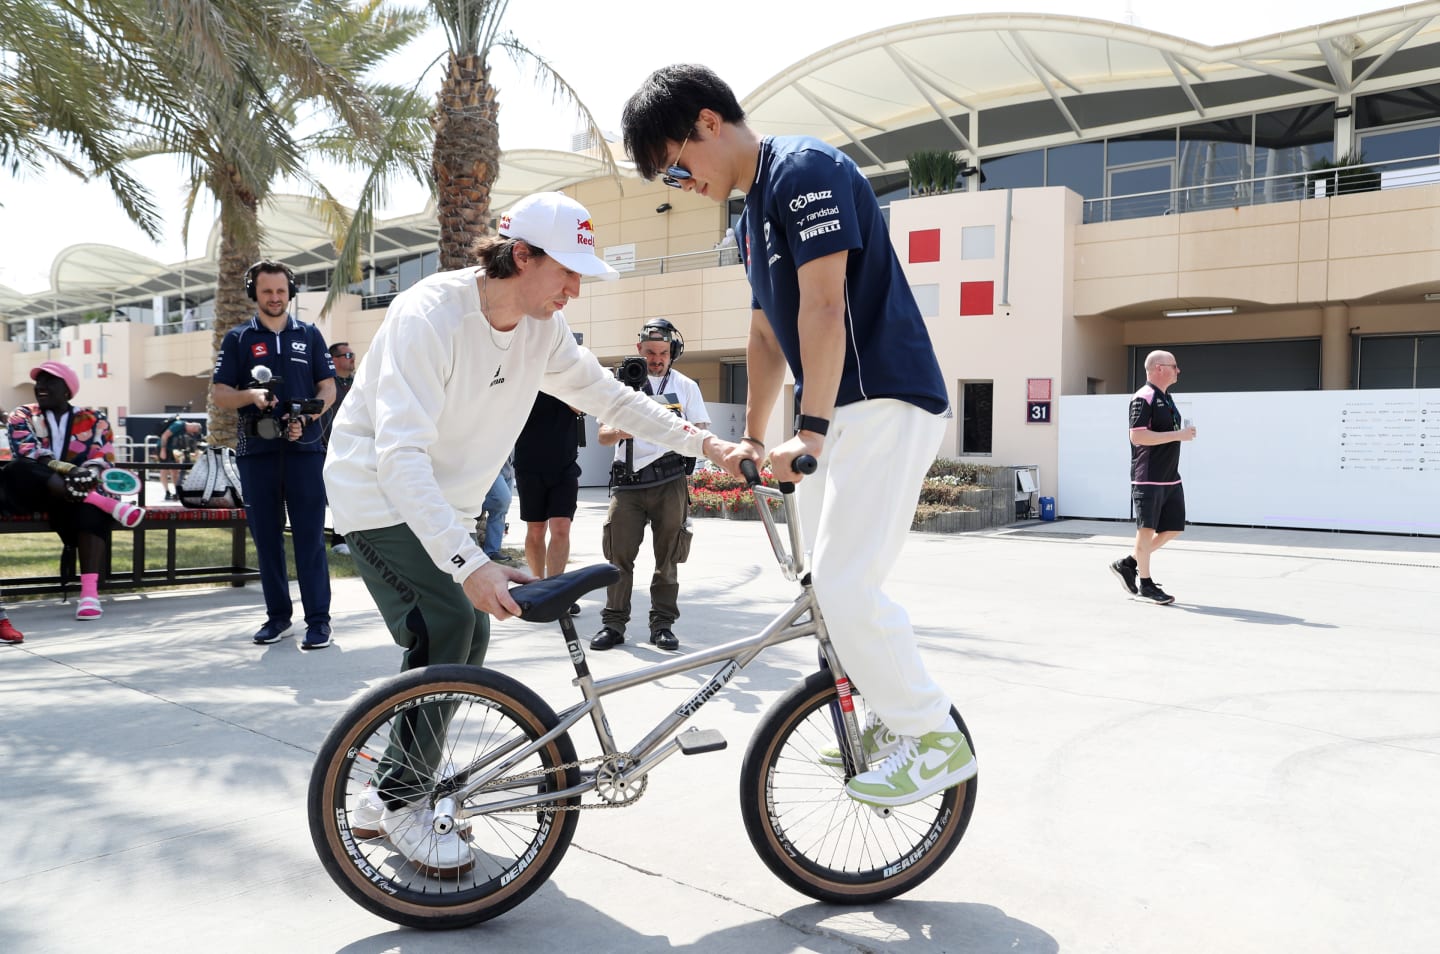 BAHRAIN, BAHRAIN - MARCH 04: Yuki Tsunoda of Japan and Scuderia AlphaTauri and Viki Gomez practice bicycle tricks in the Paddock prior to final practice ahead of the F1 Grand Prix of Bahrain at Bahrain International Circuit on March 04, 2023 in Bahrain, Bahrain. (Photo by Peter Fox/Getty Images)